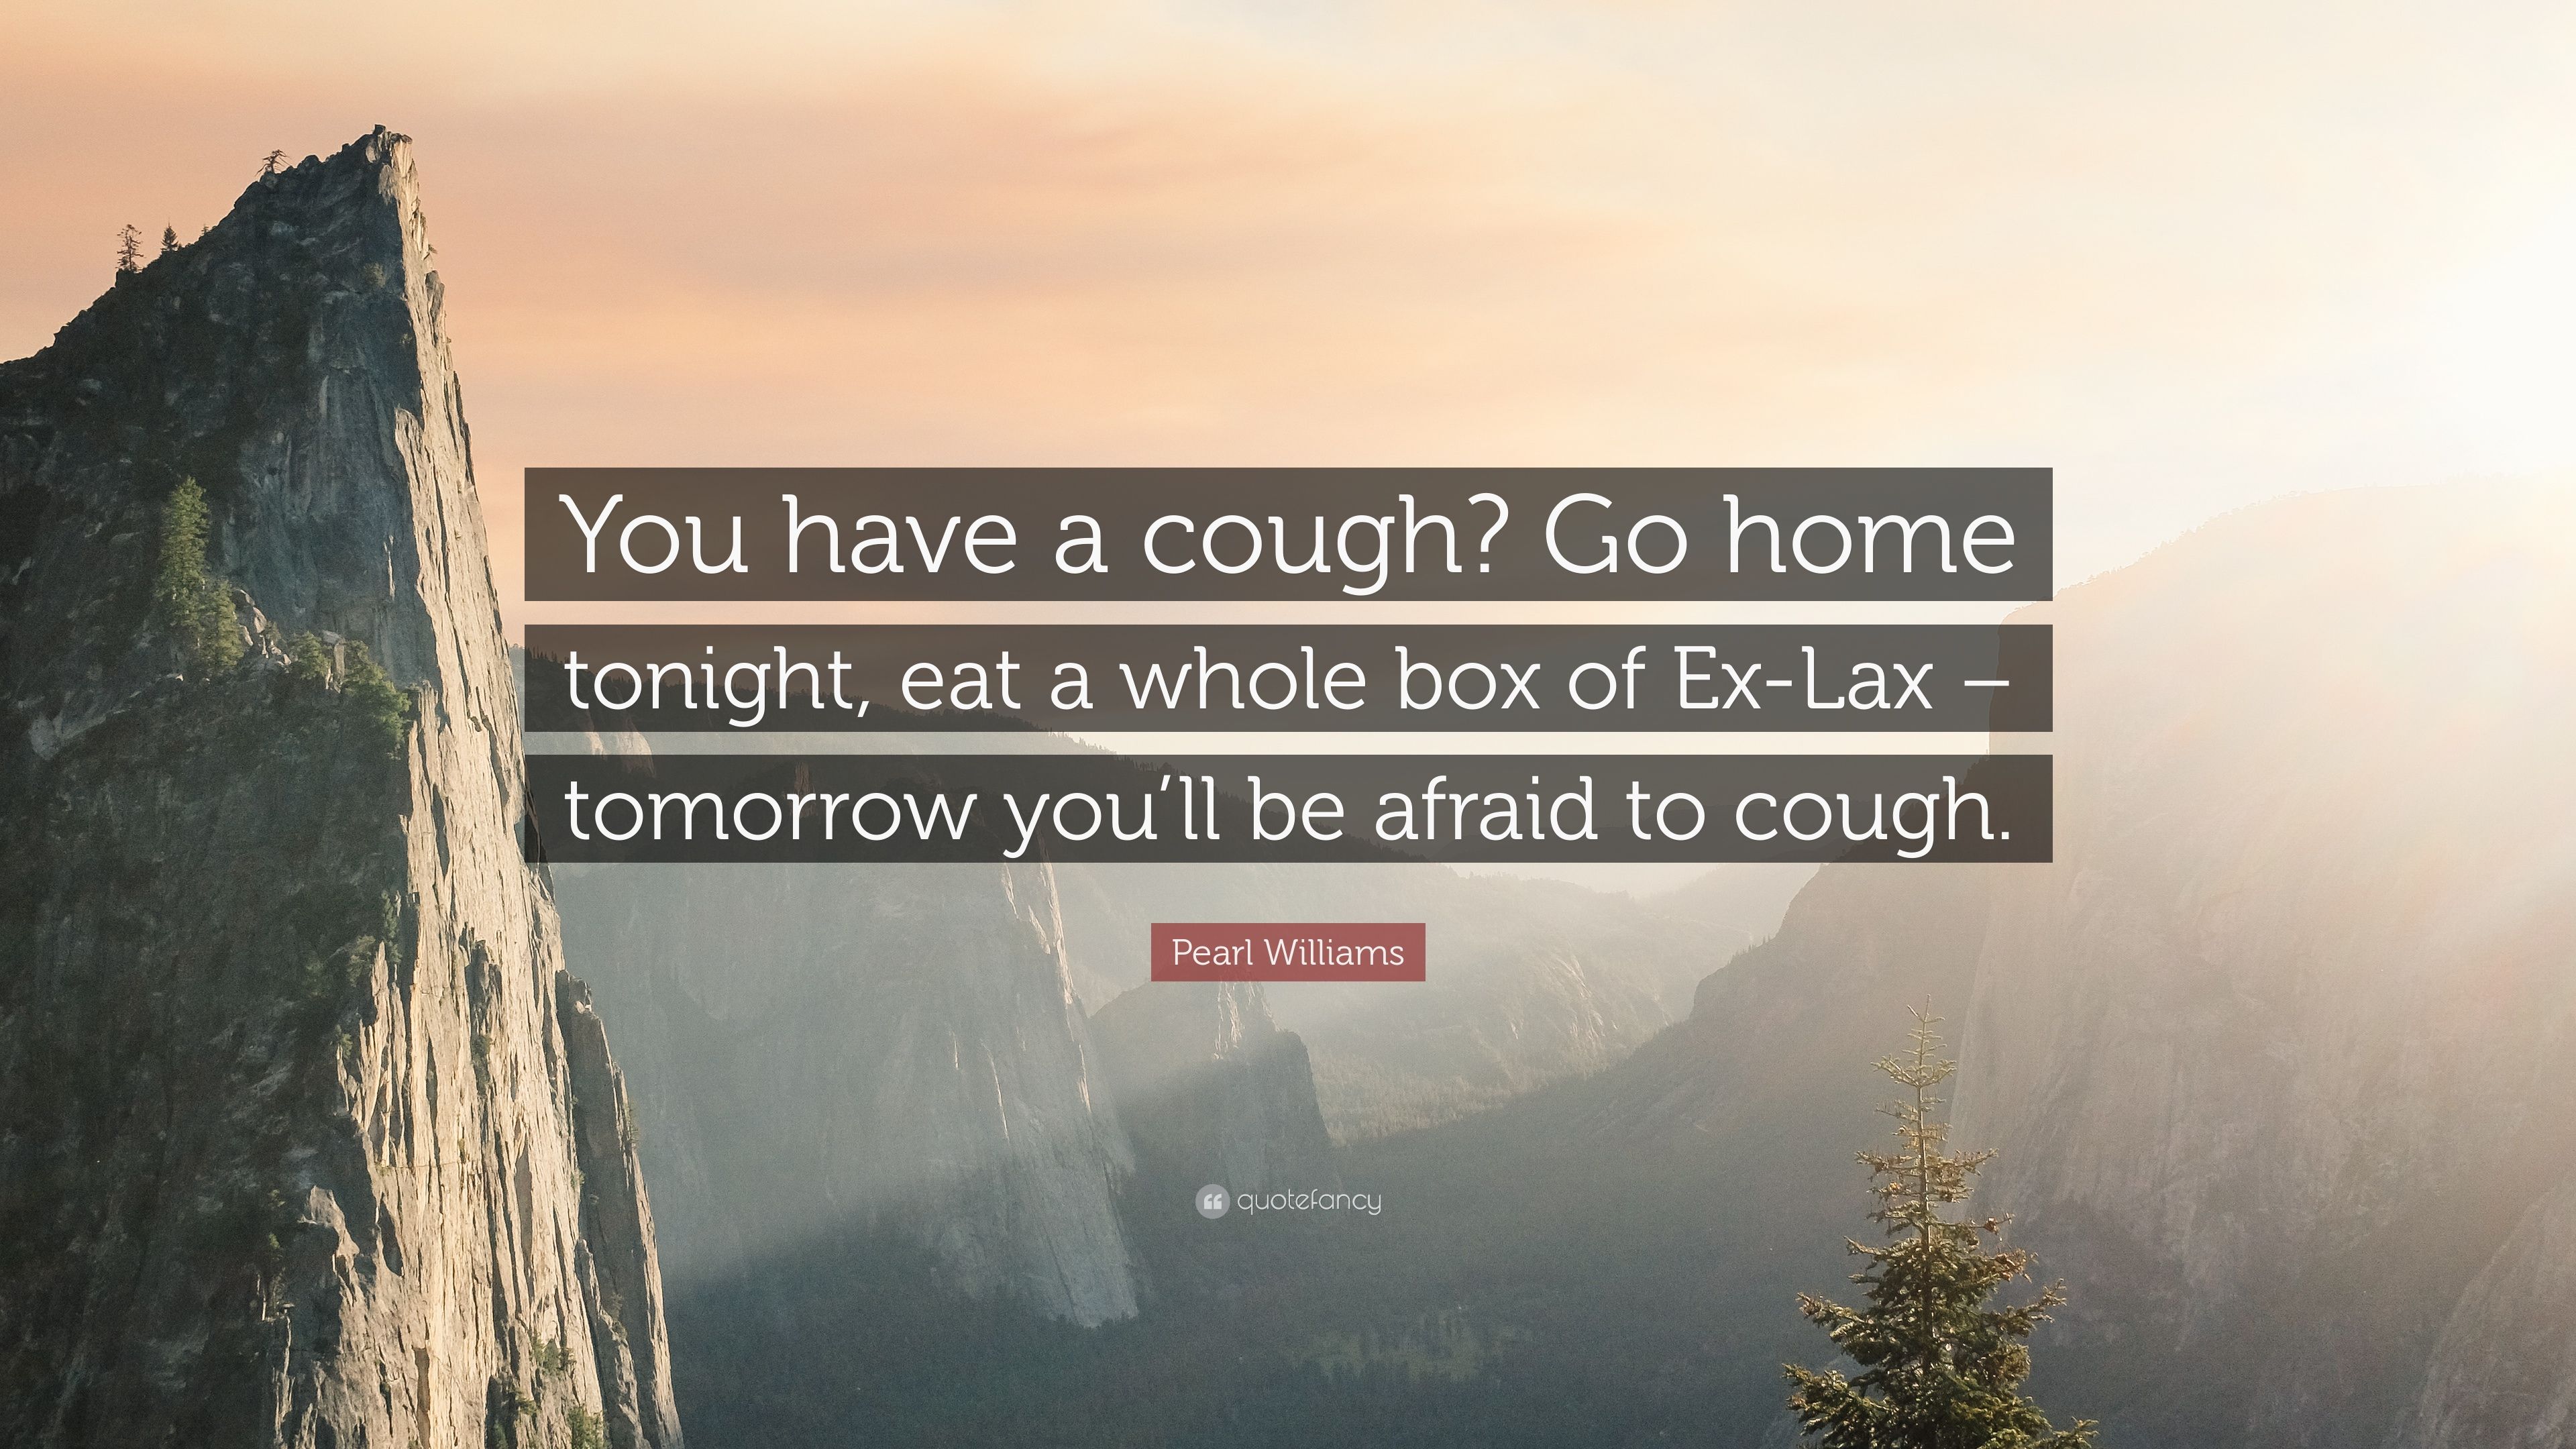 Pearl Williams Quote: “You have a cough? Go home tonight, eat a